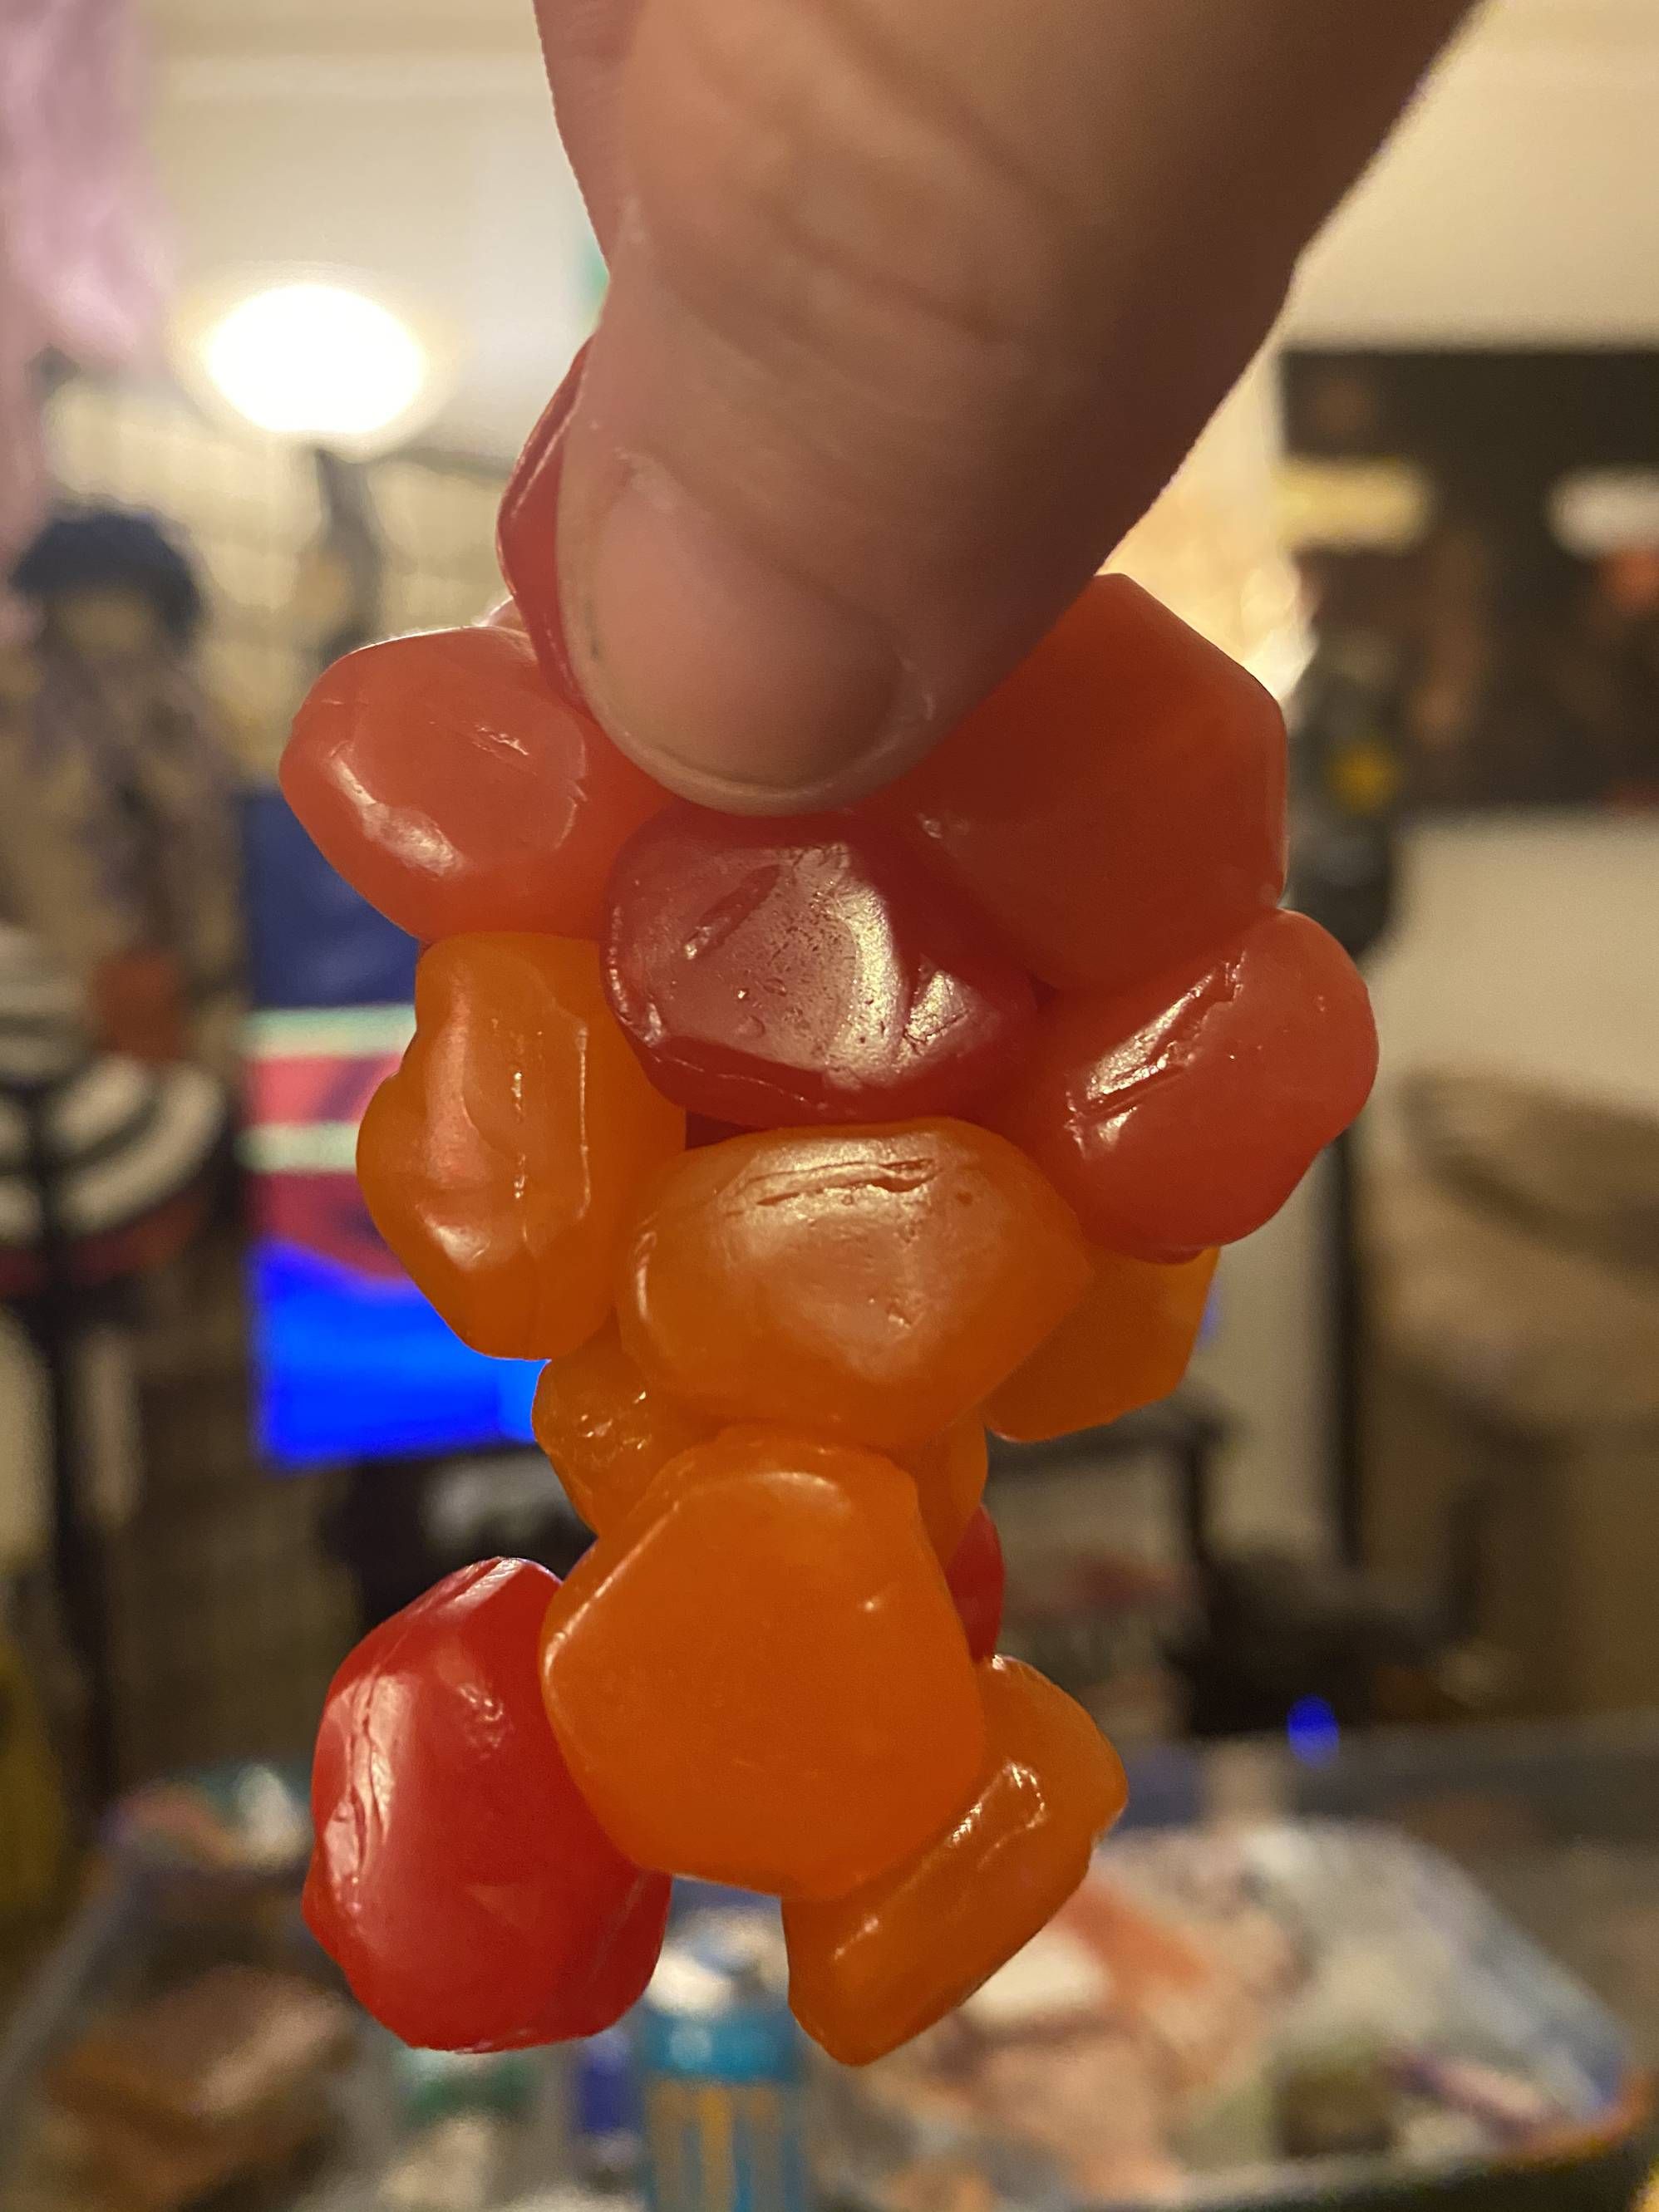 If it’s stuck together it counts as one Gusher